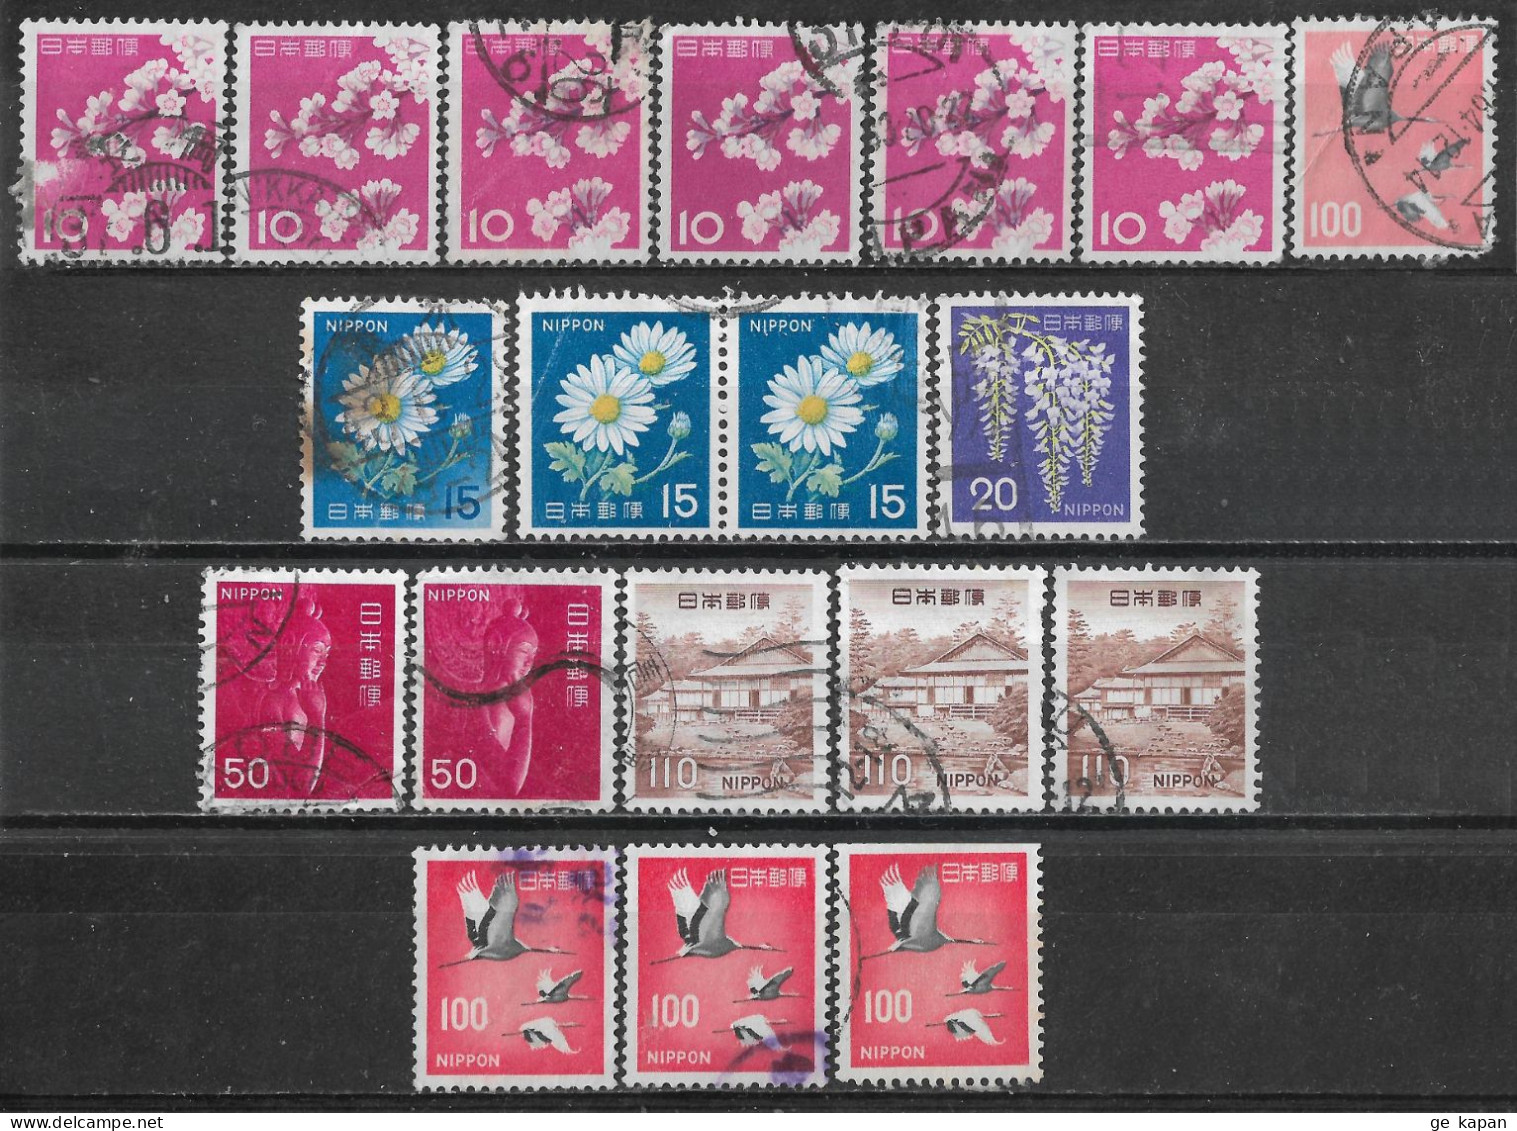 1961-1968 JAPAN Set Of 19 Used Stamps (Michel # 758A,764,930A,931A,932,937,943,1007A) CV €4.70 - Used Stamps